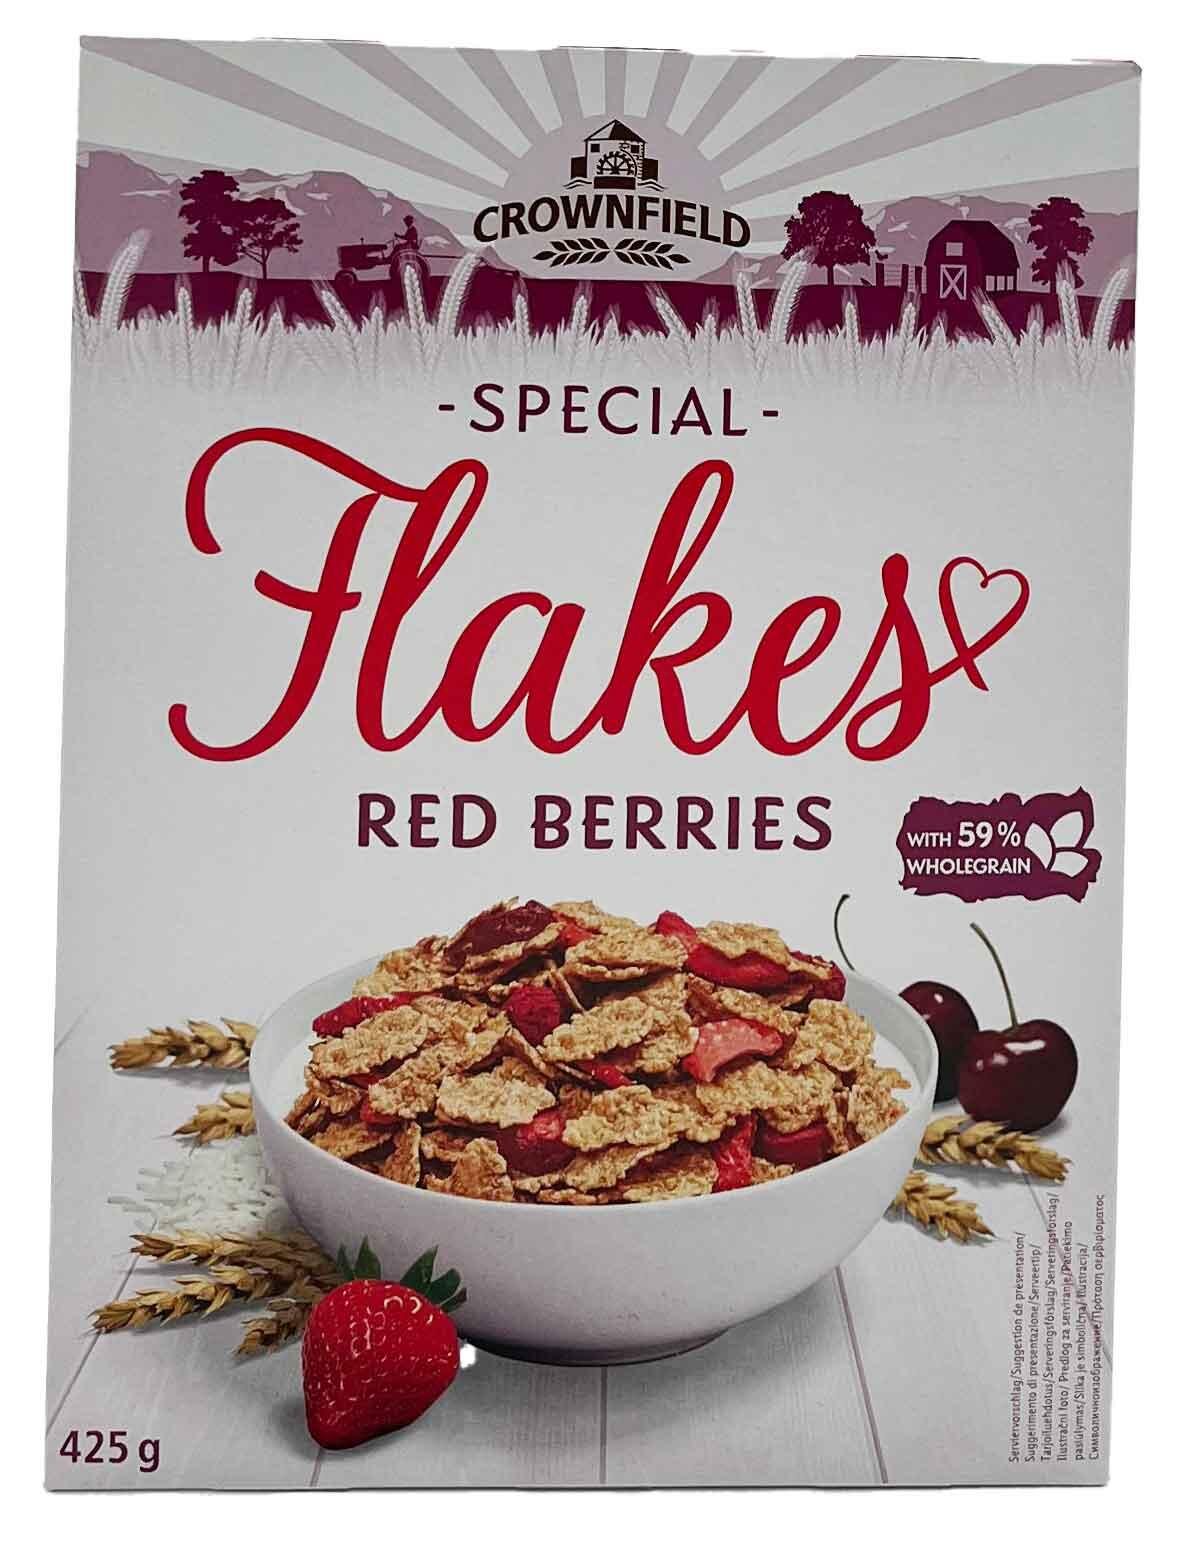 Special Flakes Red Berries Crownfield